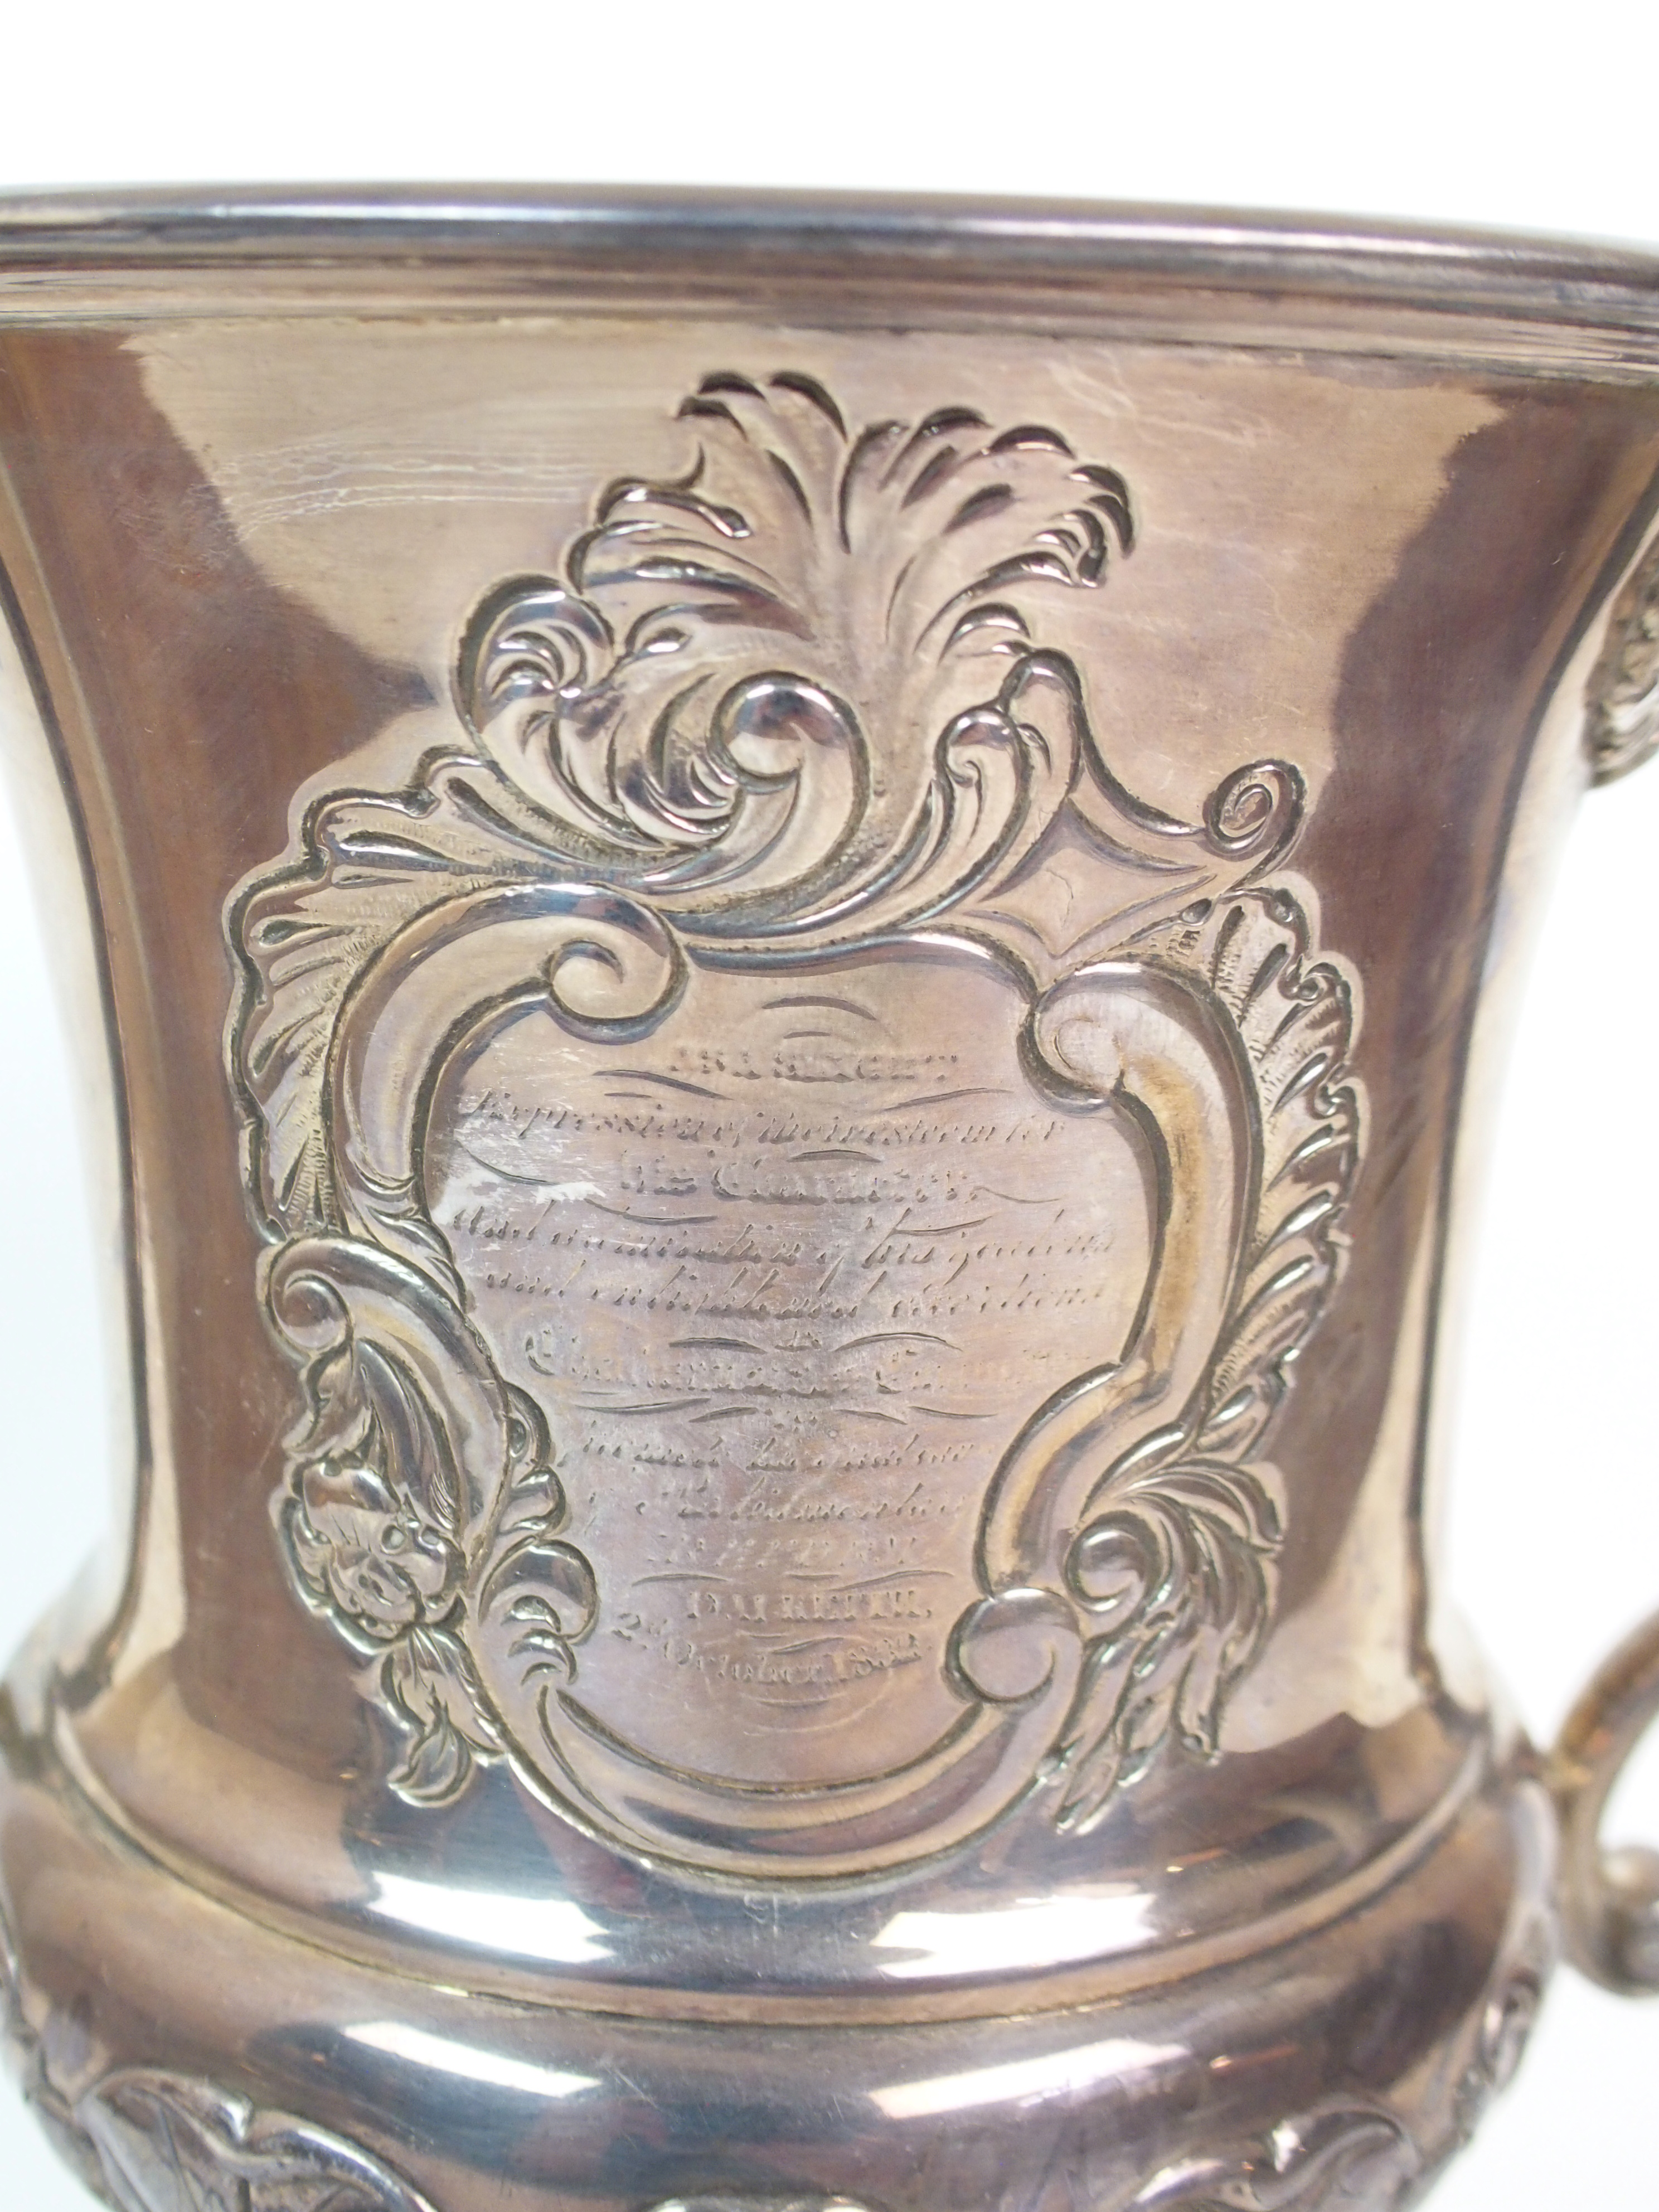 A LATE GEORGE III SILVER TROPHY CUP possibly by Alexander Edmondstoun III, Edinburgh 1817, of - Image 7 of 10